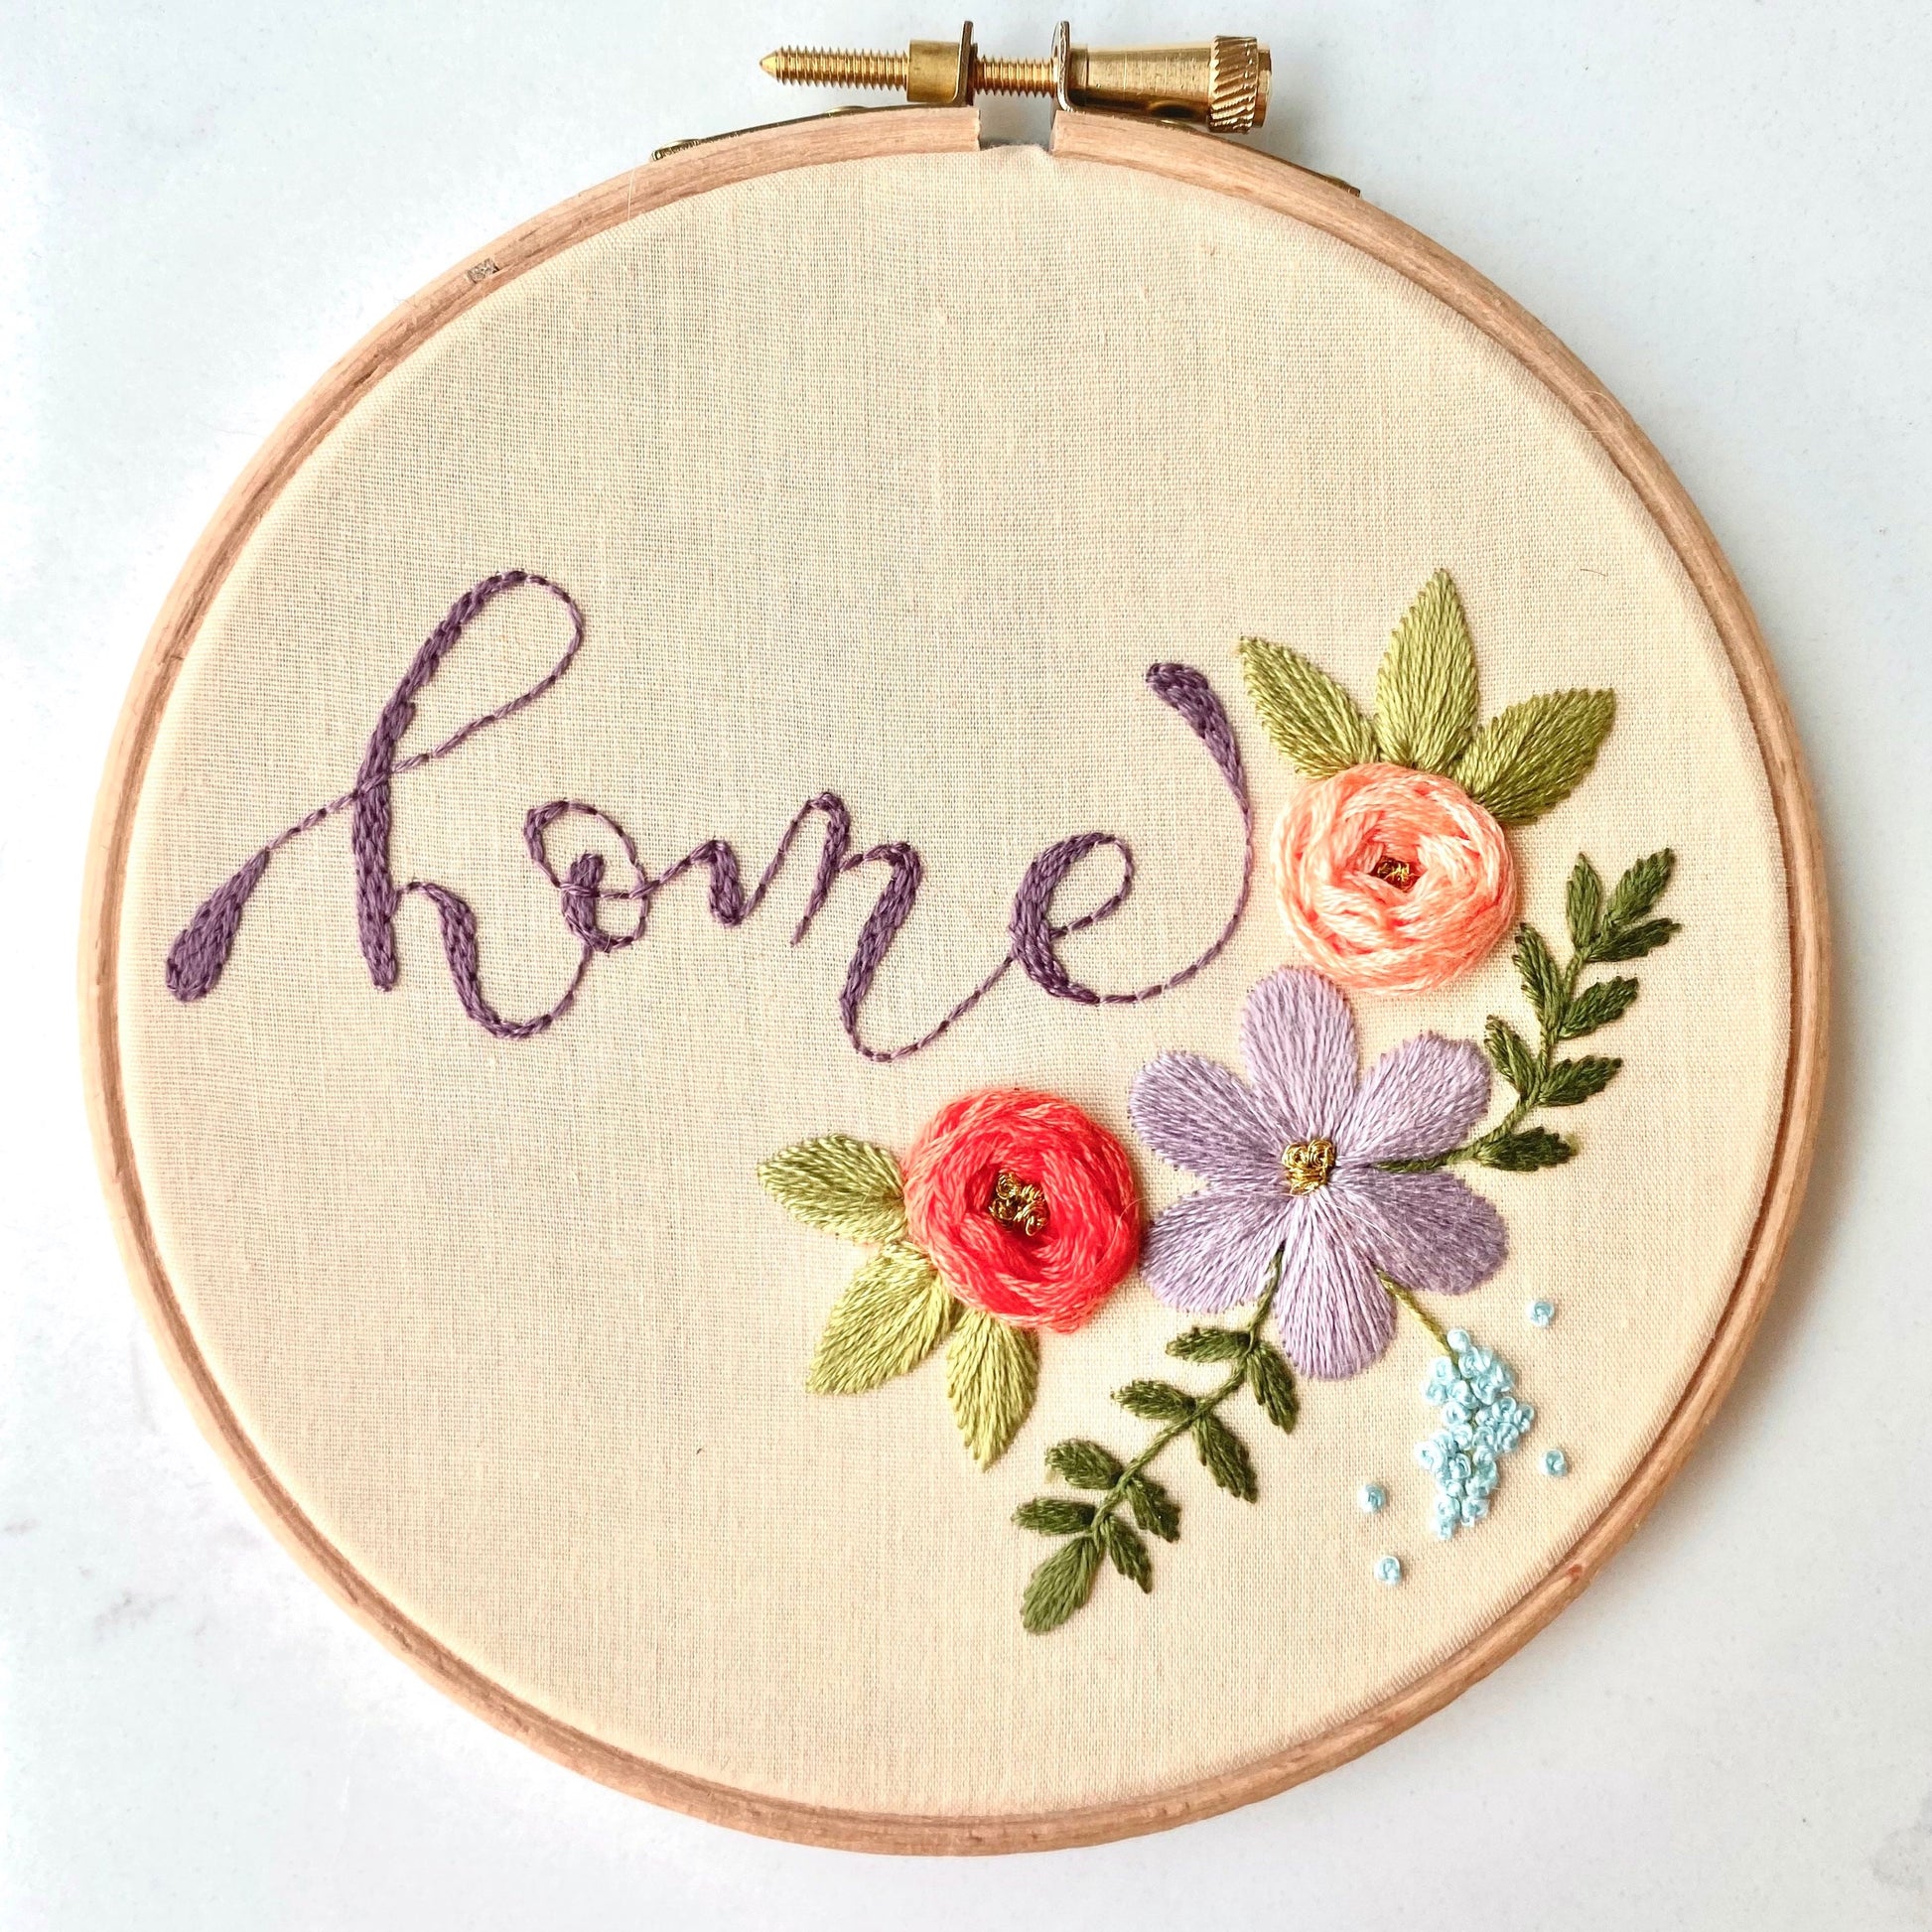 New Home Embroidery Hoop